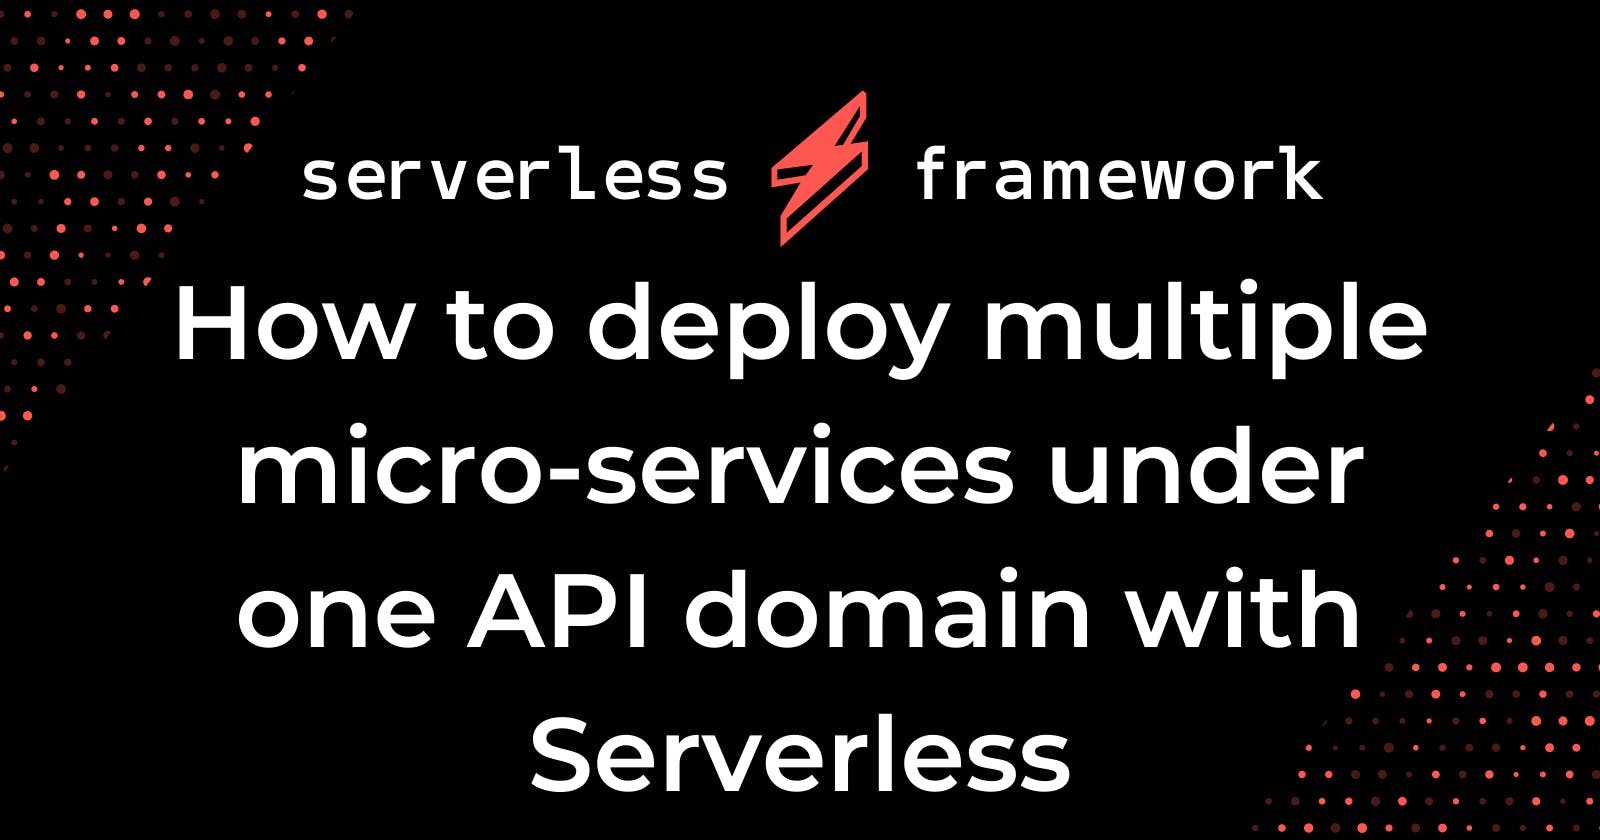 How to deploy multiple micro-services under one API domain with Serverless